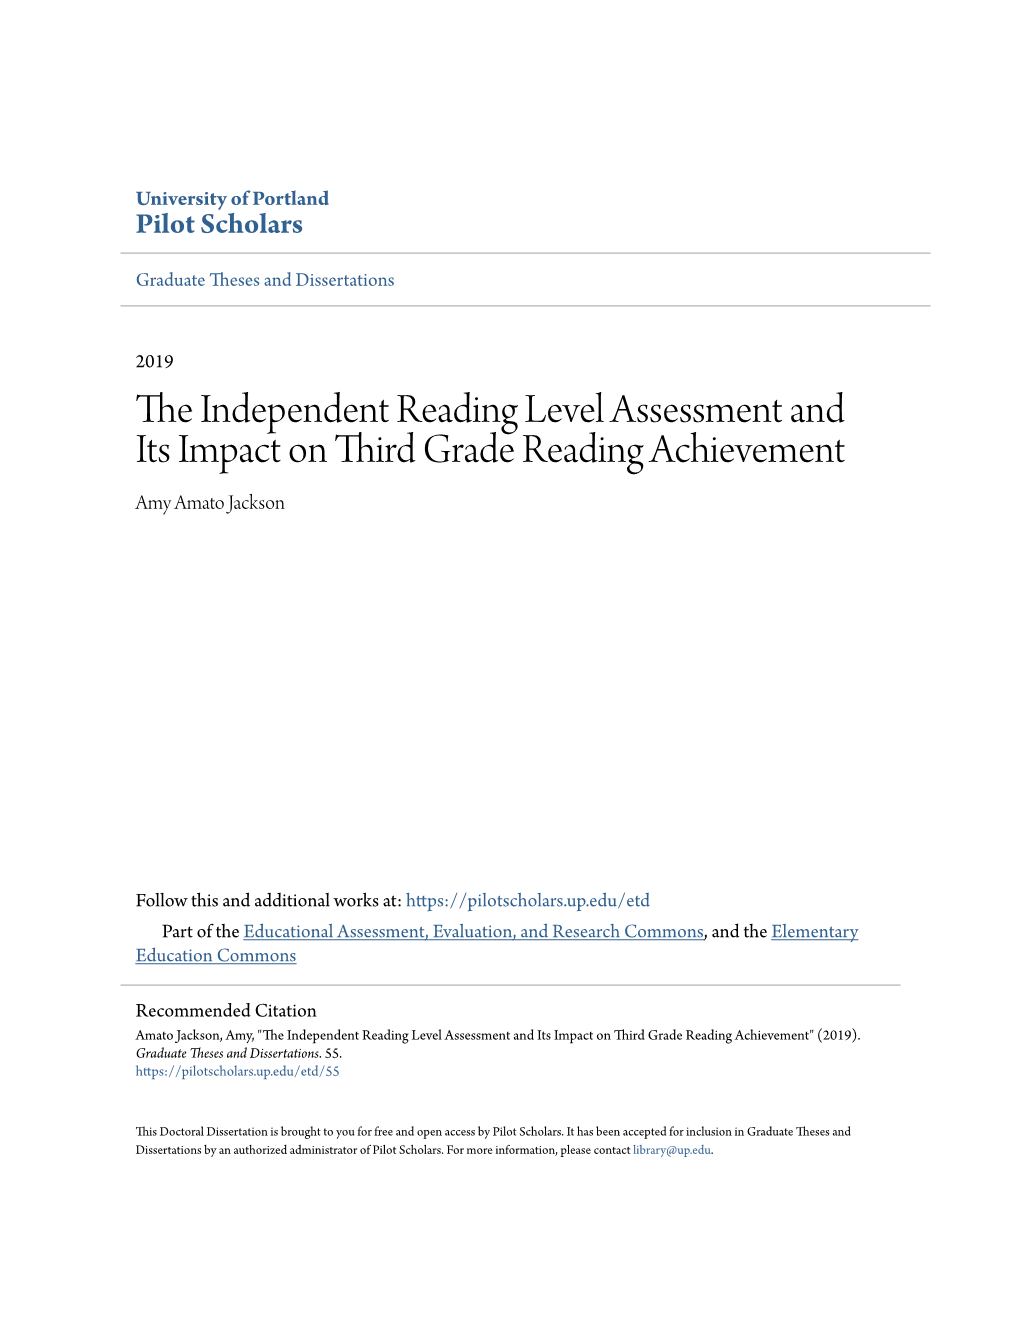 The Independent Reading Level Assessment and Its Impact on Third Grade